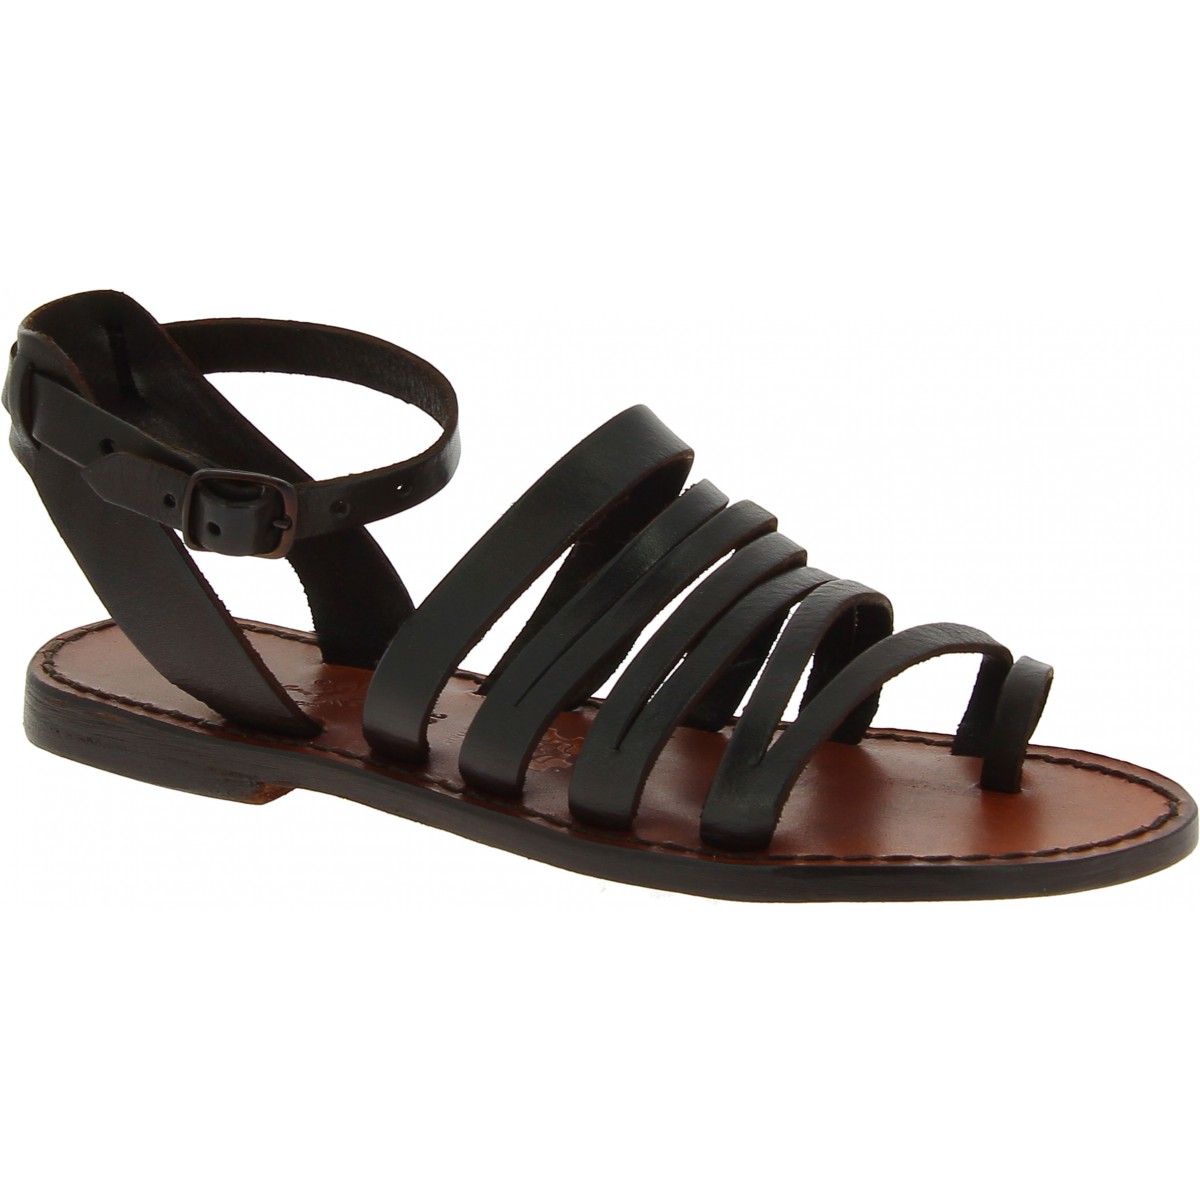 Women's thong sandals in dark brown leather handmade in Italy | The ...